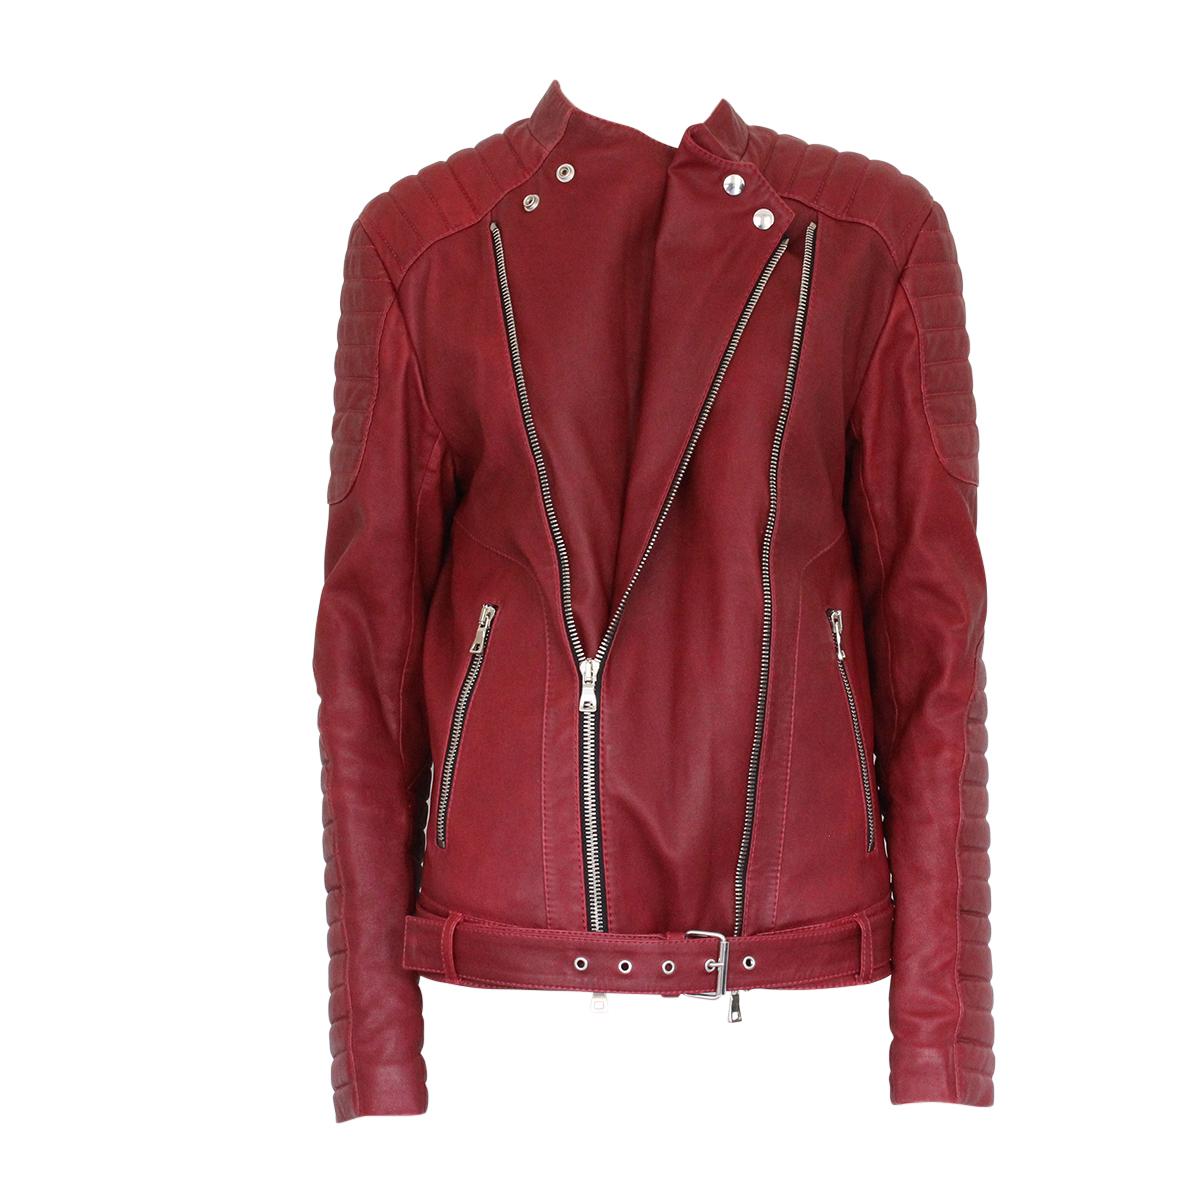 Amazing Balmain men's jacket
Supersoft leather
Red color
Zip closure, can be worn in 3 different ways
2 Pockets
With belt
Length shoulder/hem cm 52 (24.4 inches)
Shoulder length cm 47 (18.5 inches)
Original price € 4000
Worldwide express shipping